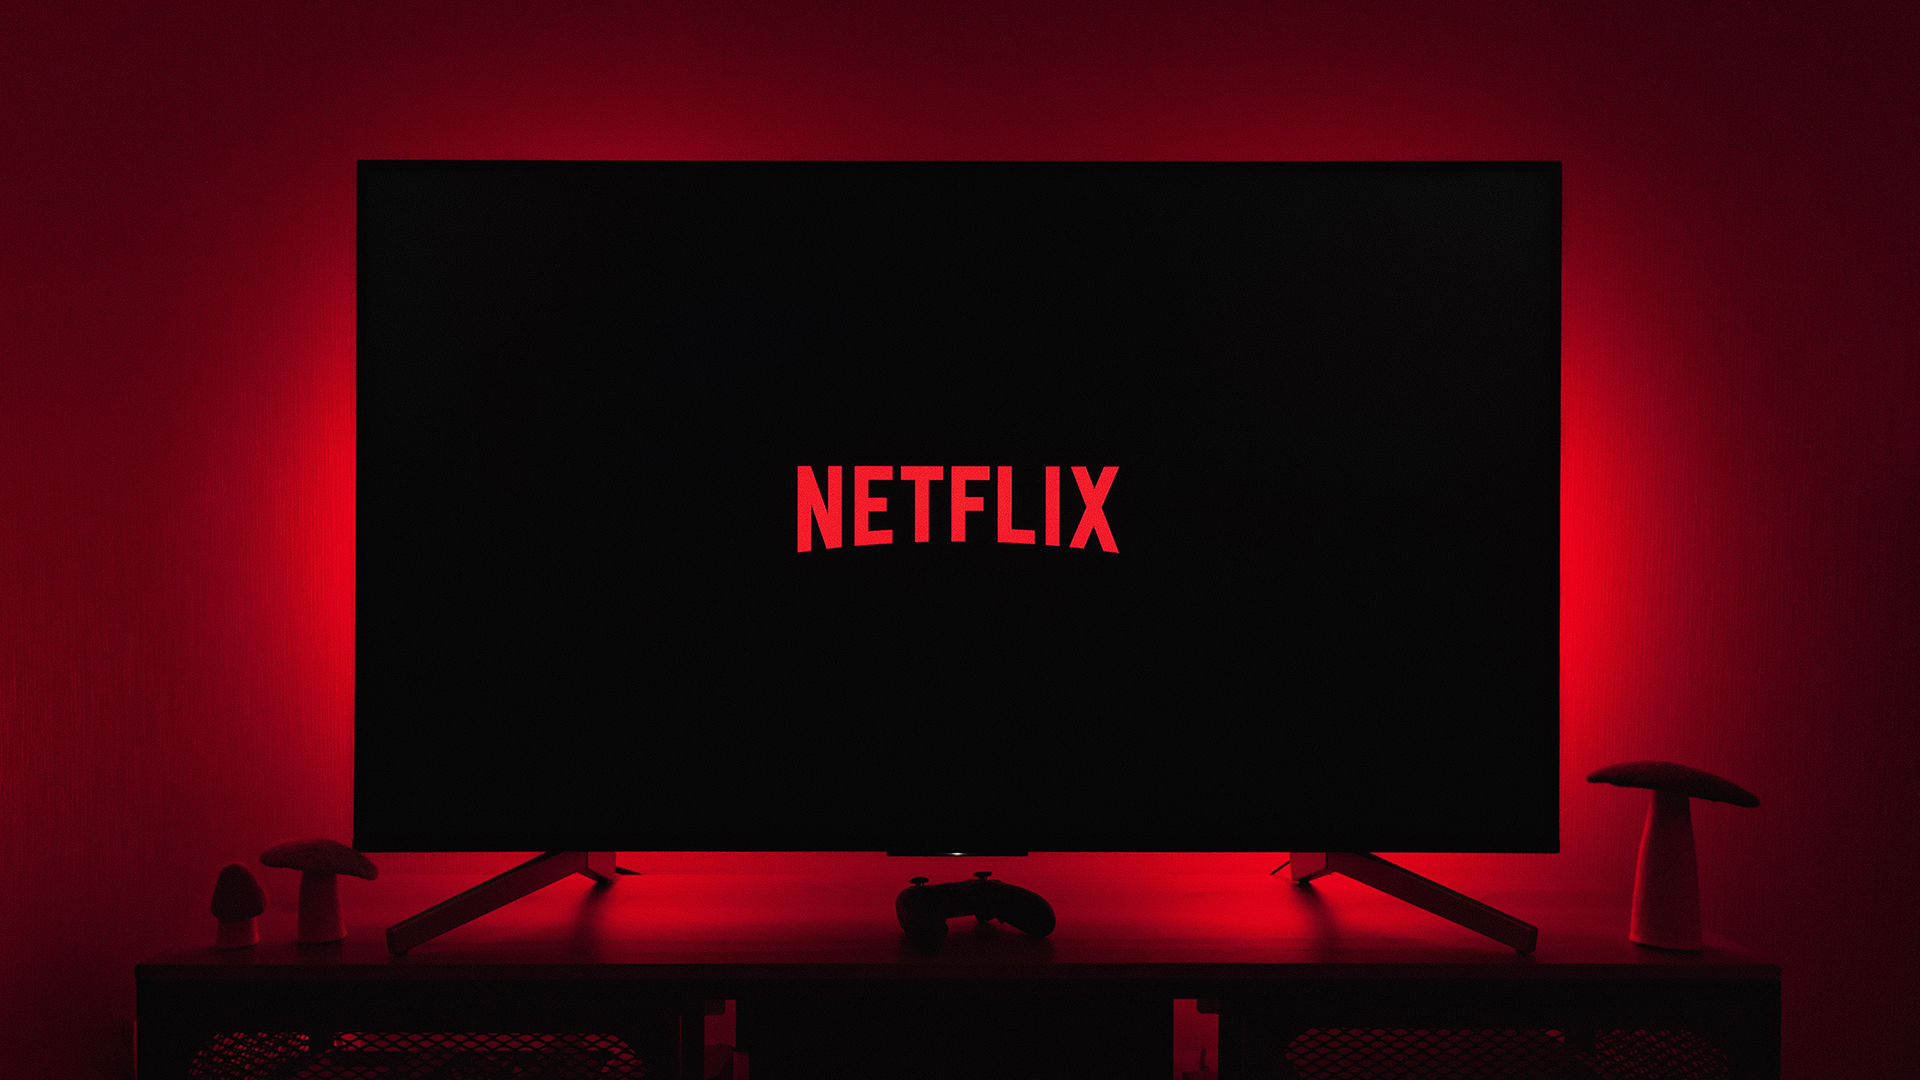 Netflix and Microsoft partnership deal, ad-supported plan